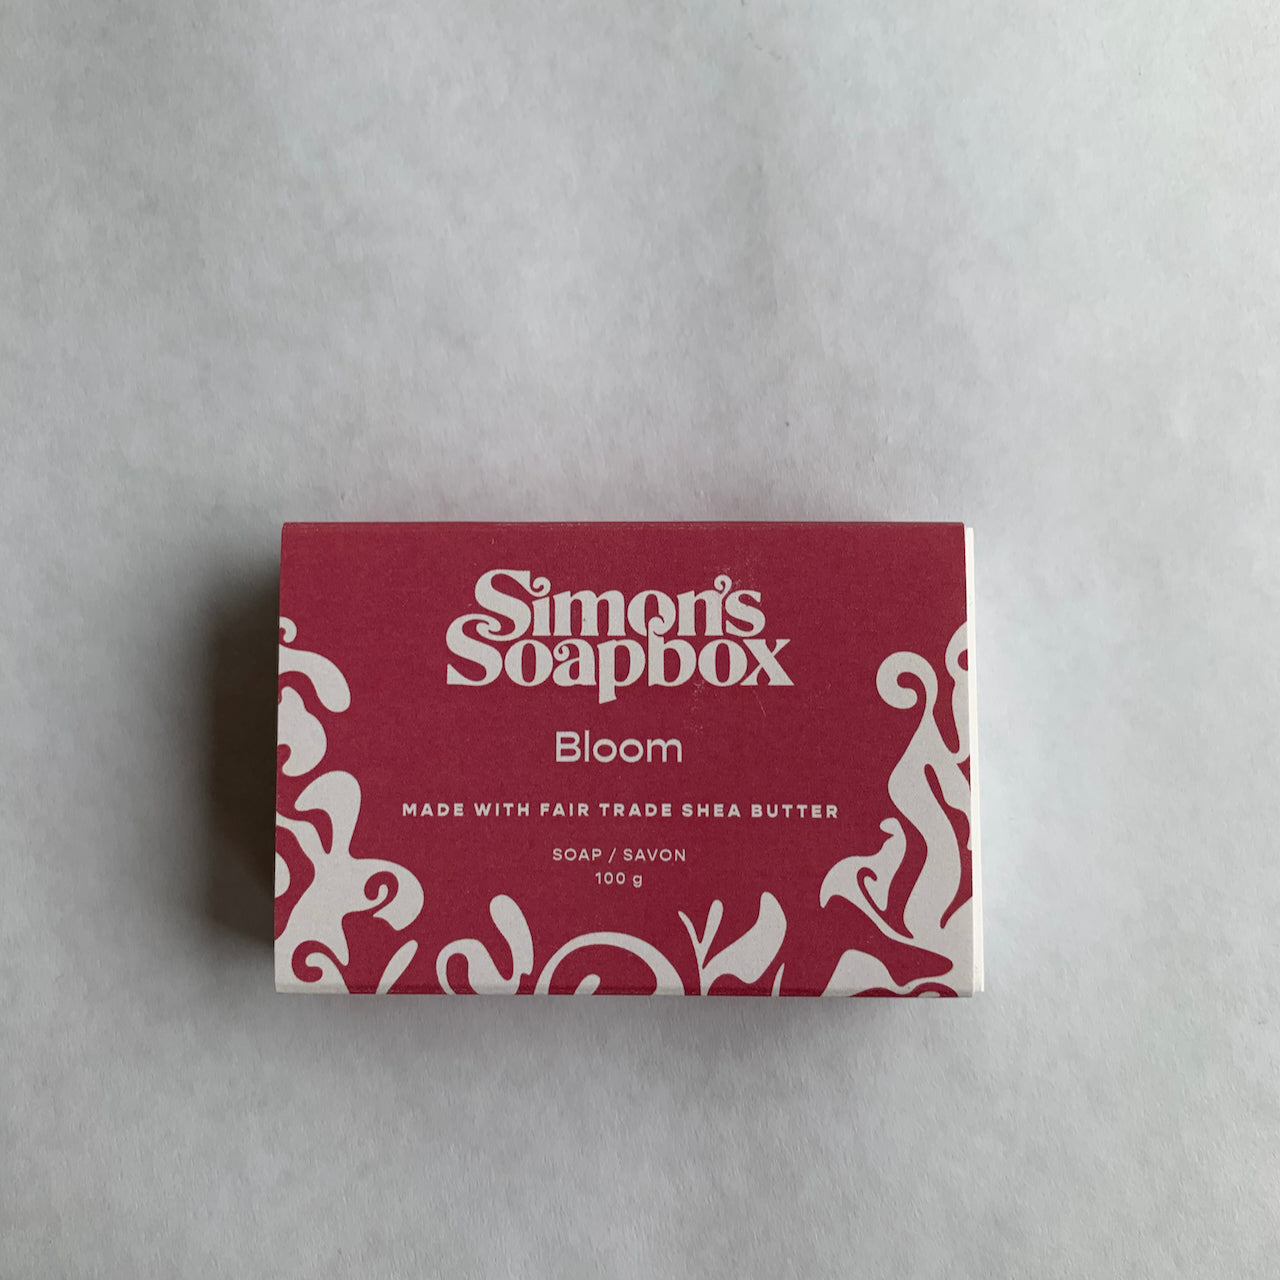 pink package that reads Simon's Soapbox Bloom made with fair trade shea butter 100 g